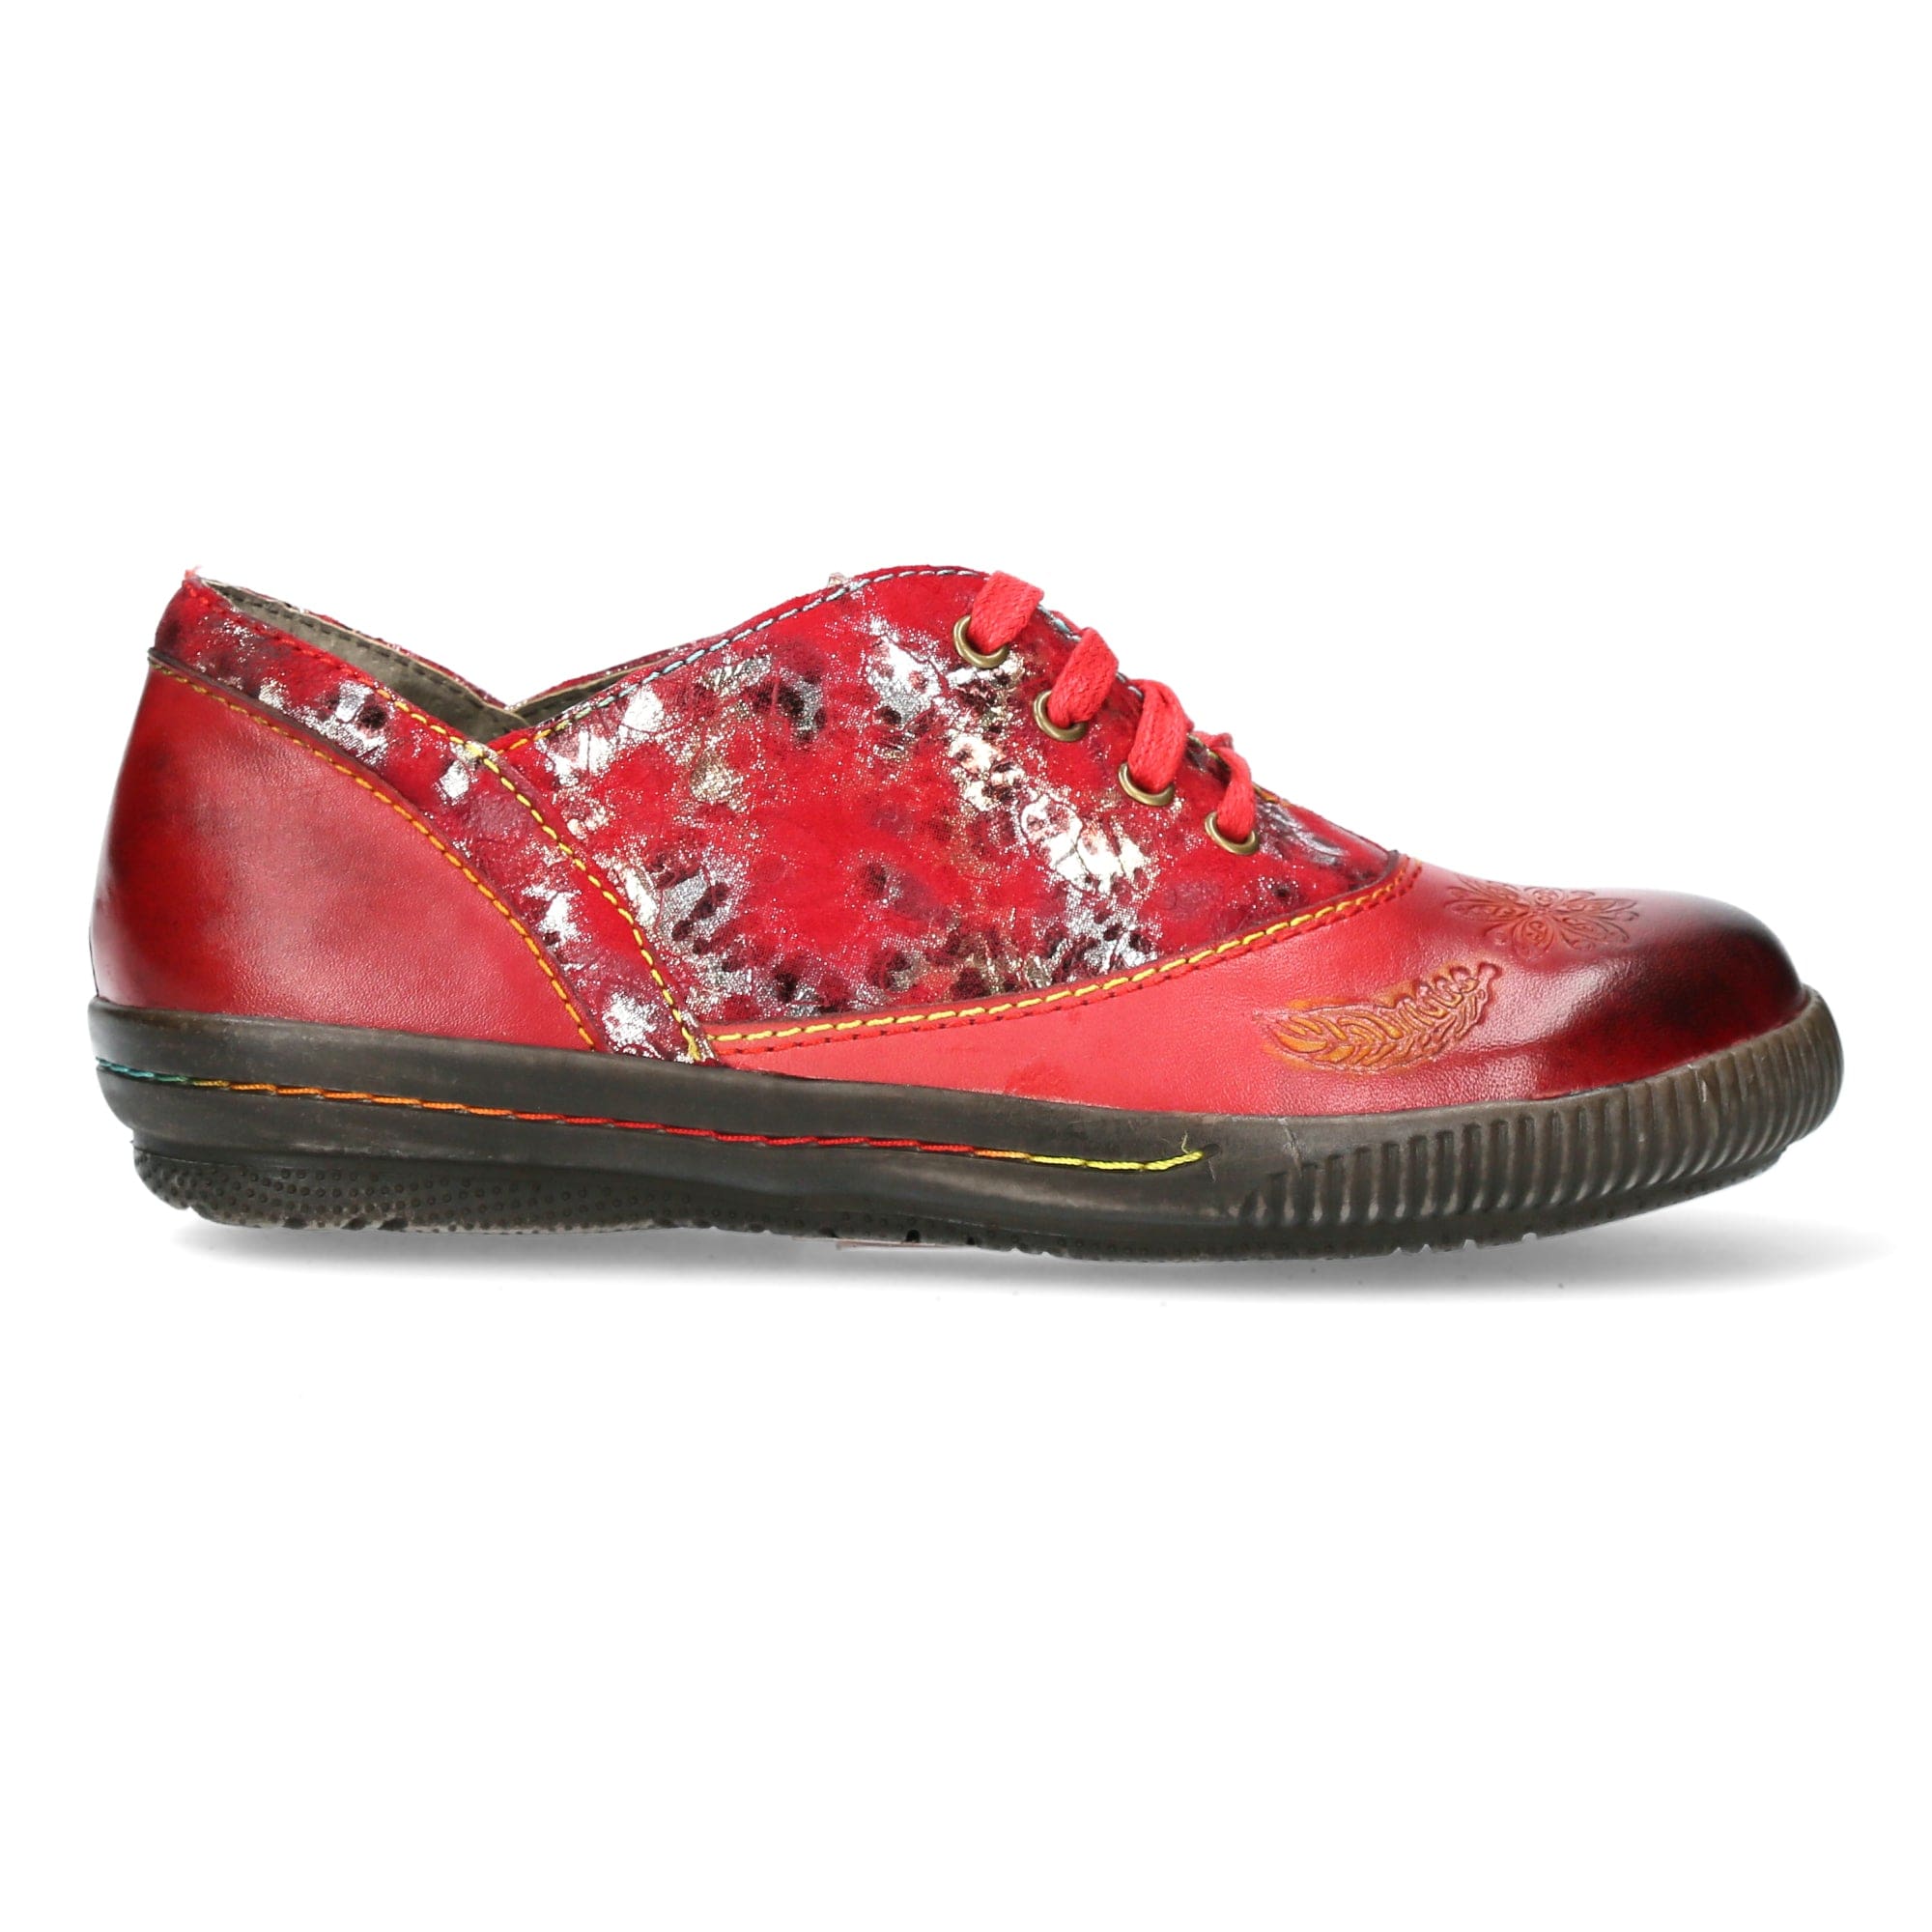 Chaussure OPO 02 - 36 / Rouge - Derbies